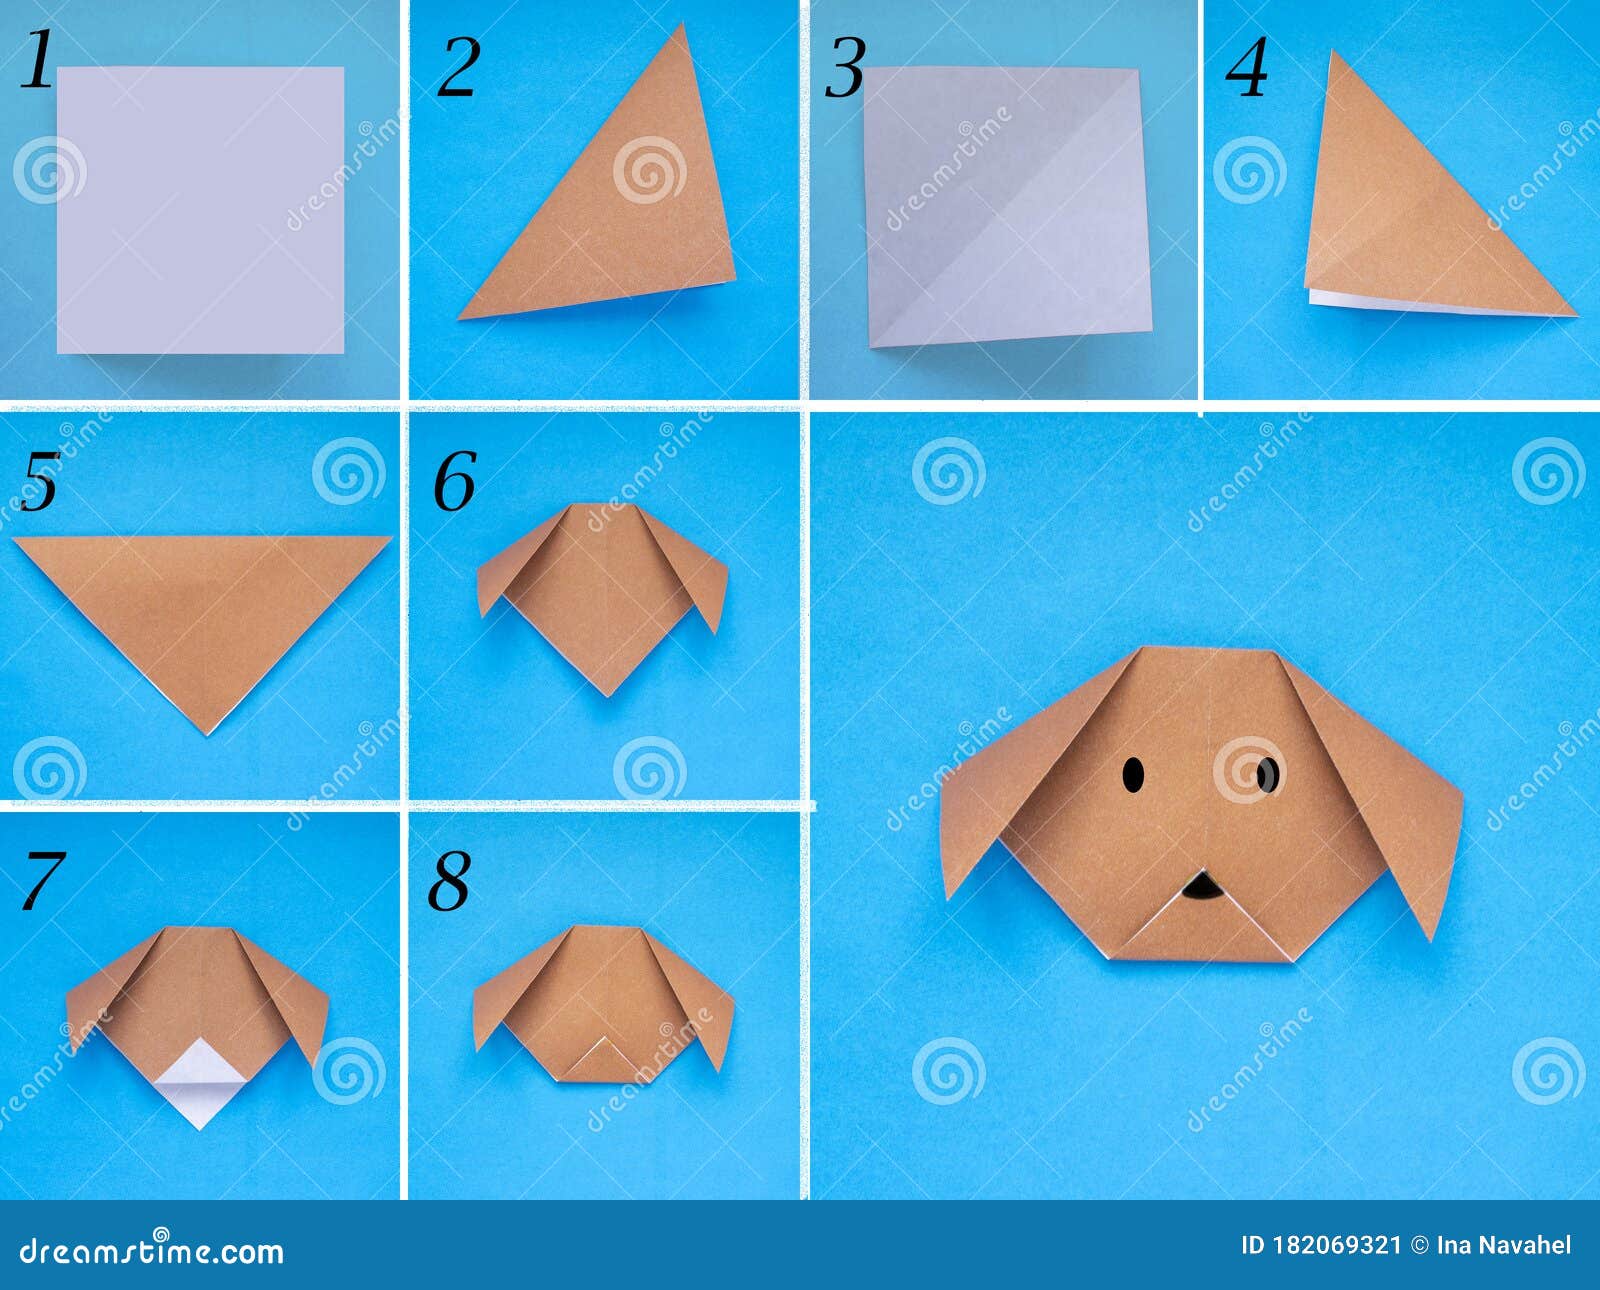 Step by Step Photo Instruction How To Make Origami Paper Dog. Simple